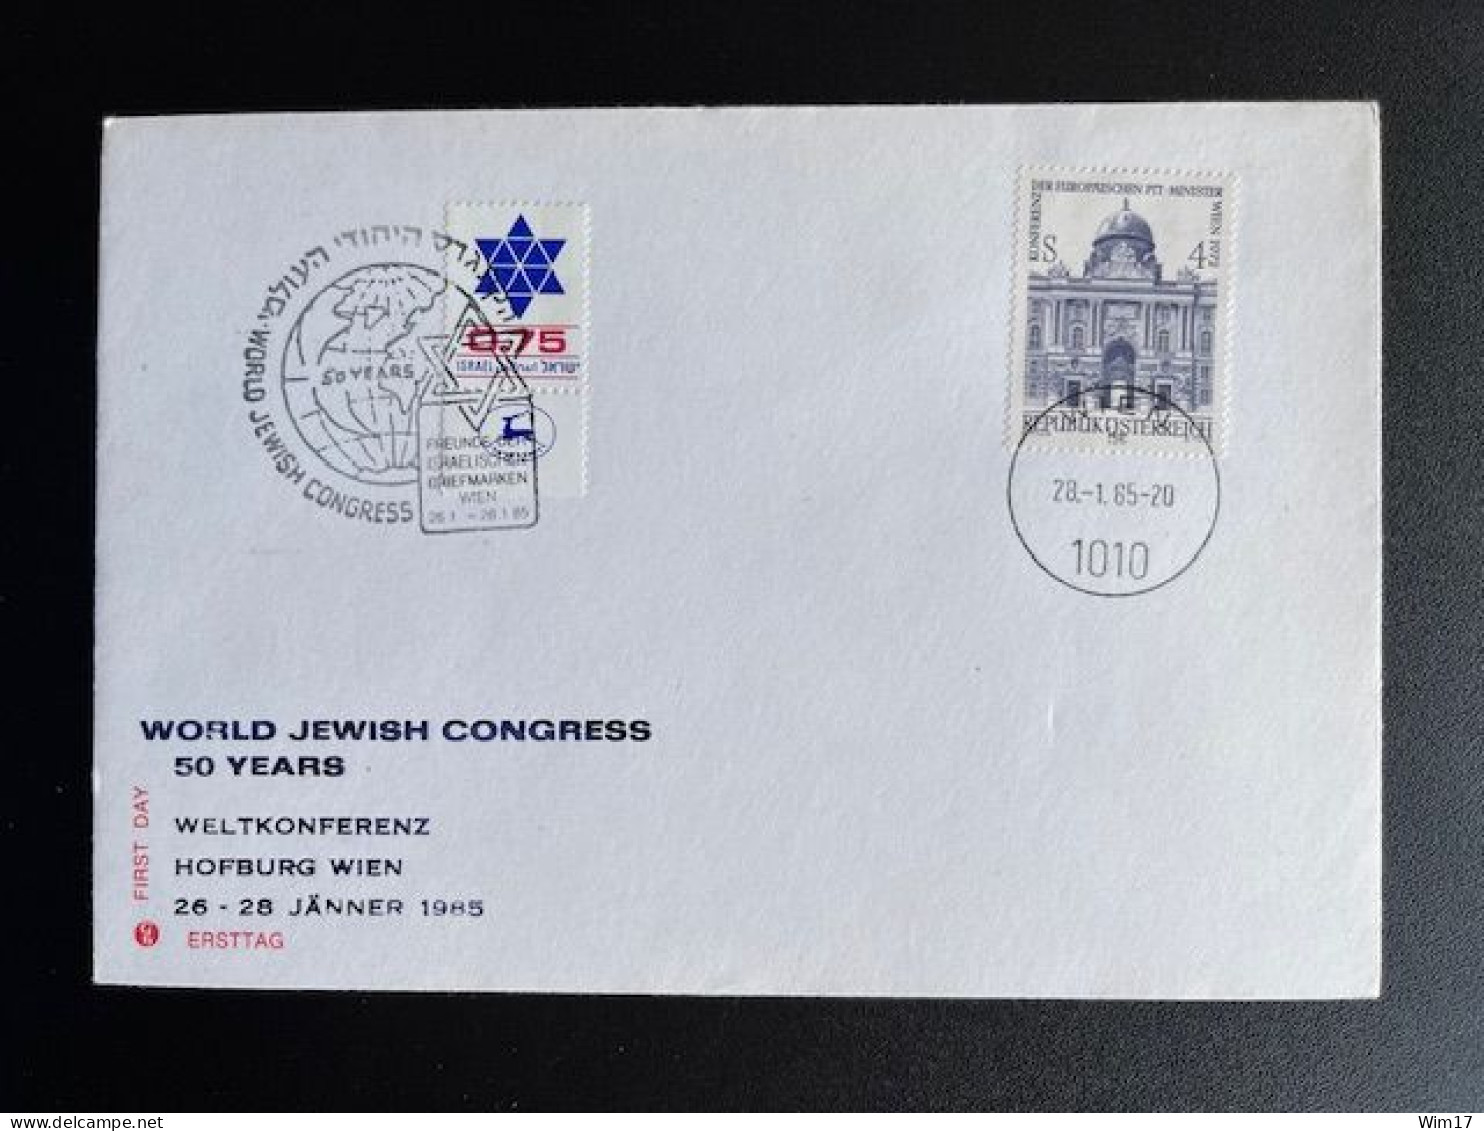 AUSTRIA 1985 SPECIAL COVER 50 YEARS WORLD JEWISH CONGRESS 28-01-1985 OOSTENRIJK OSTERREICH JUDAICA - Covers & Documents